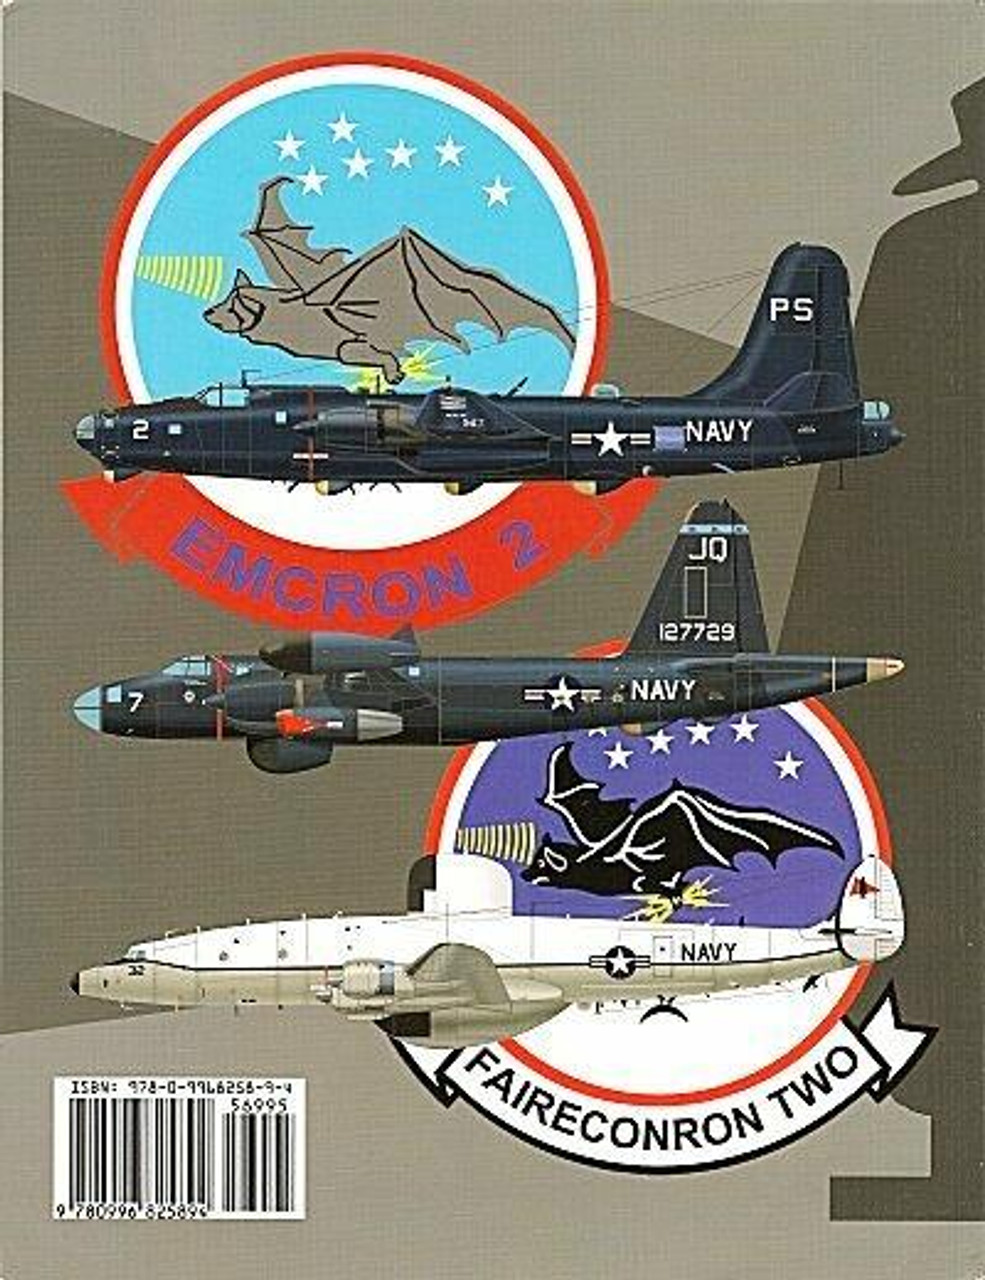 GIN302 Ginter Books - VQ-2 From Bats to Rangers MMD Squadron